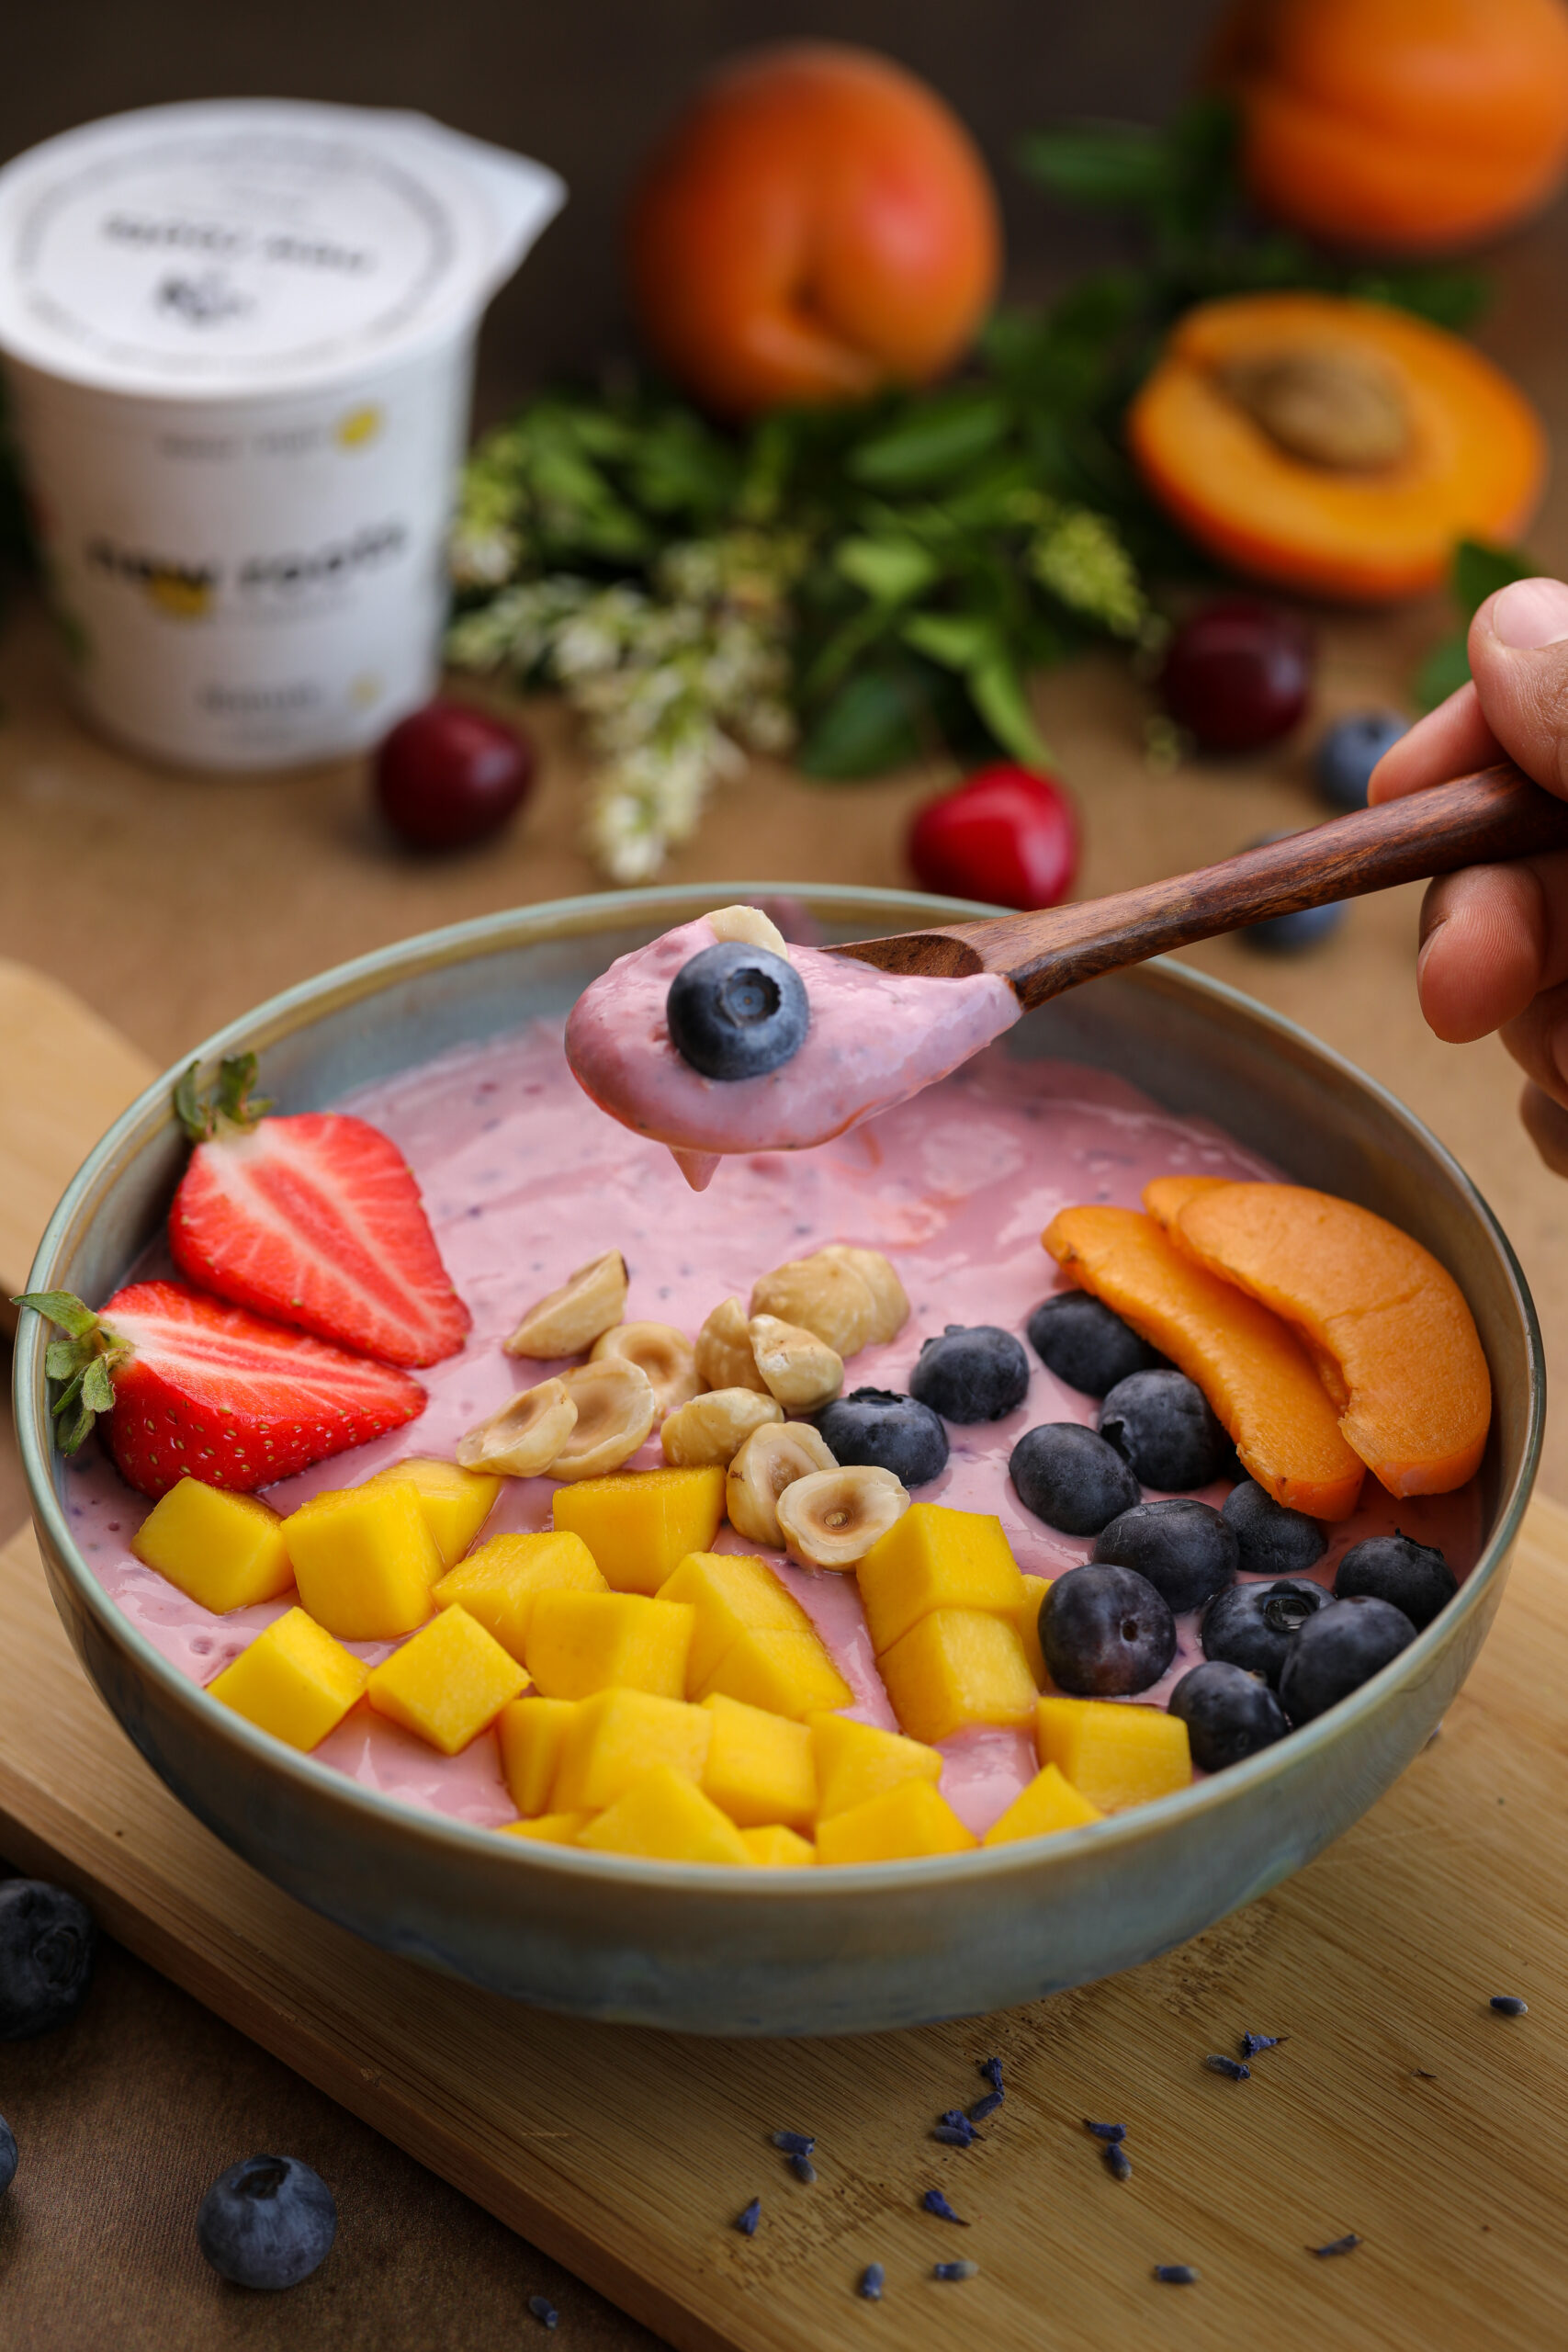 This smoothie bowl is proof that healthy and decadent can coexist!